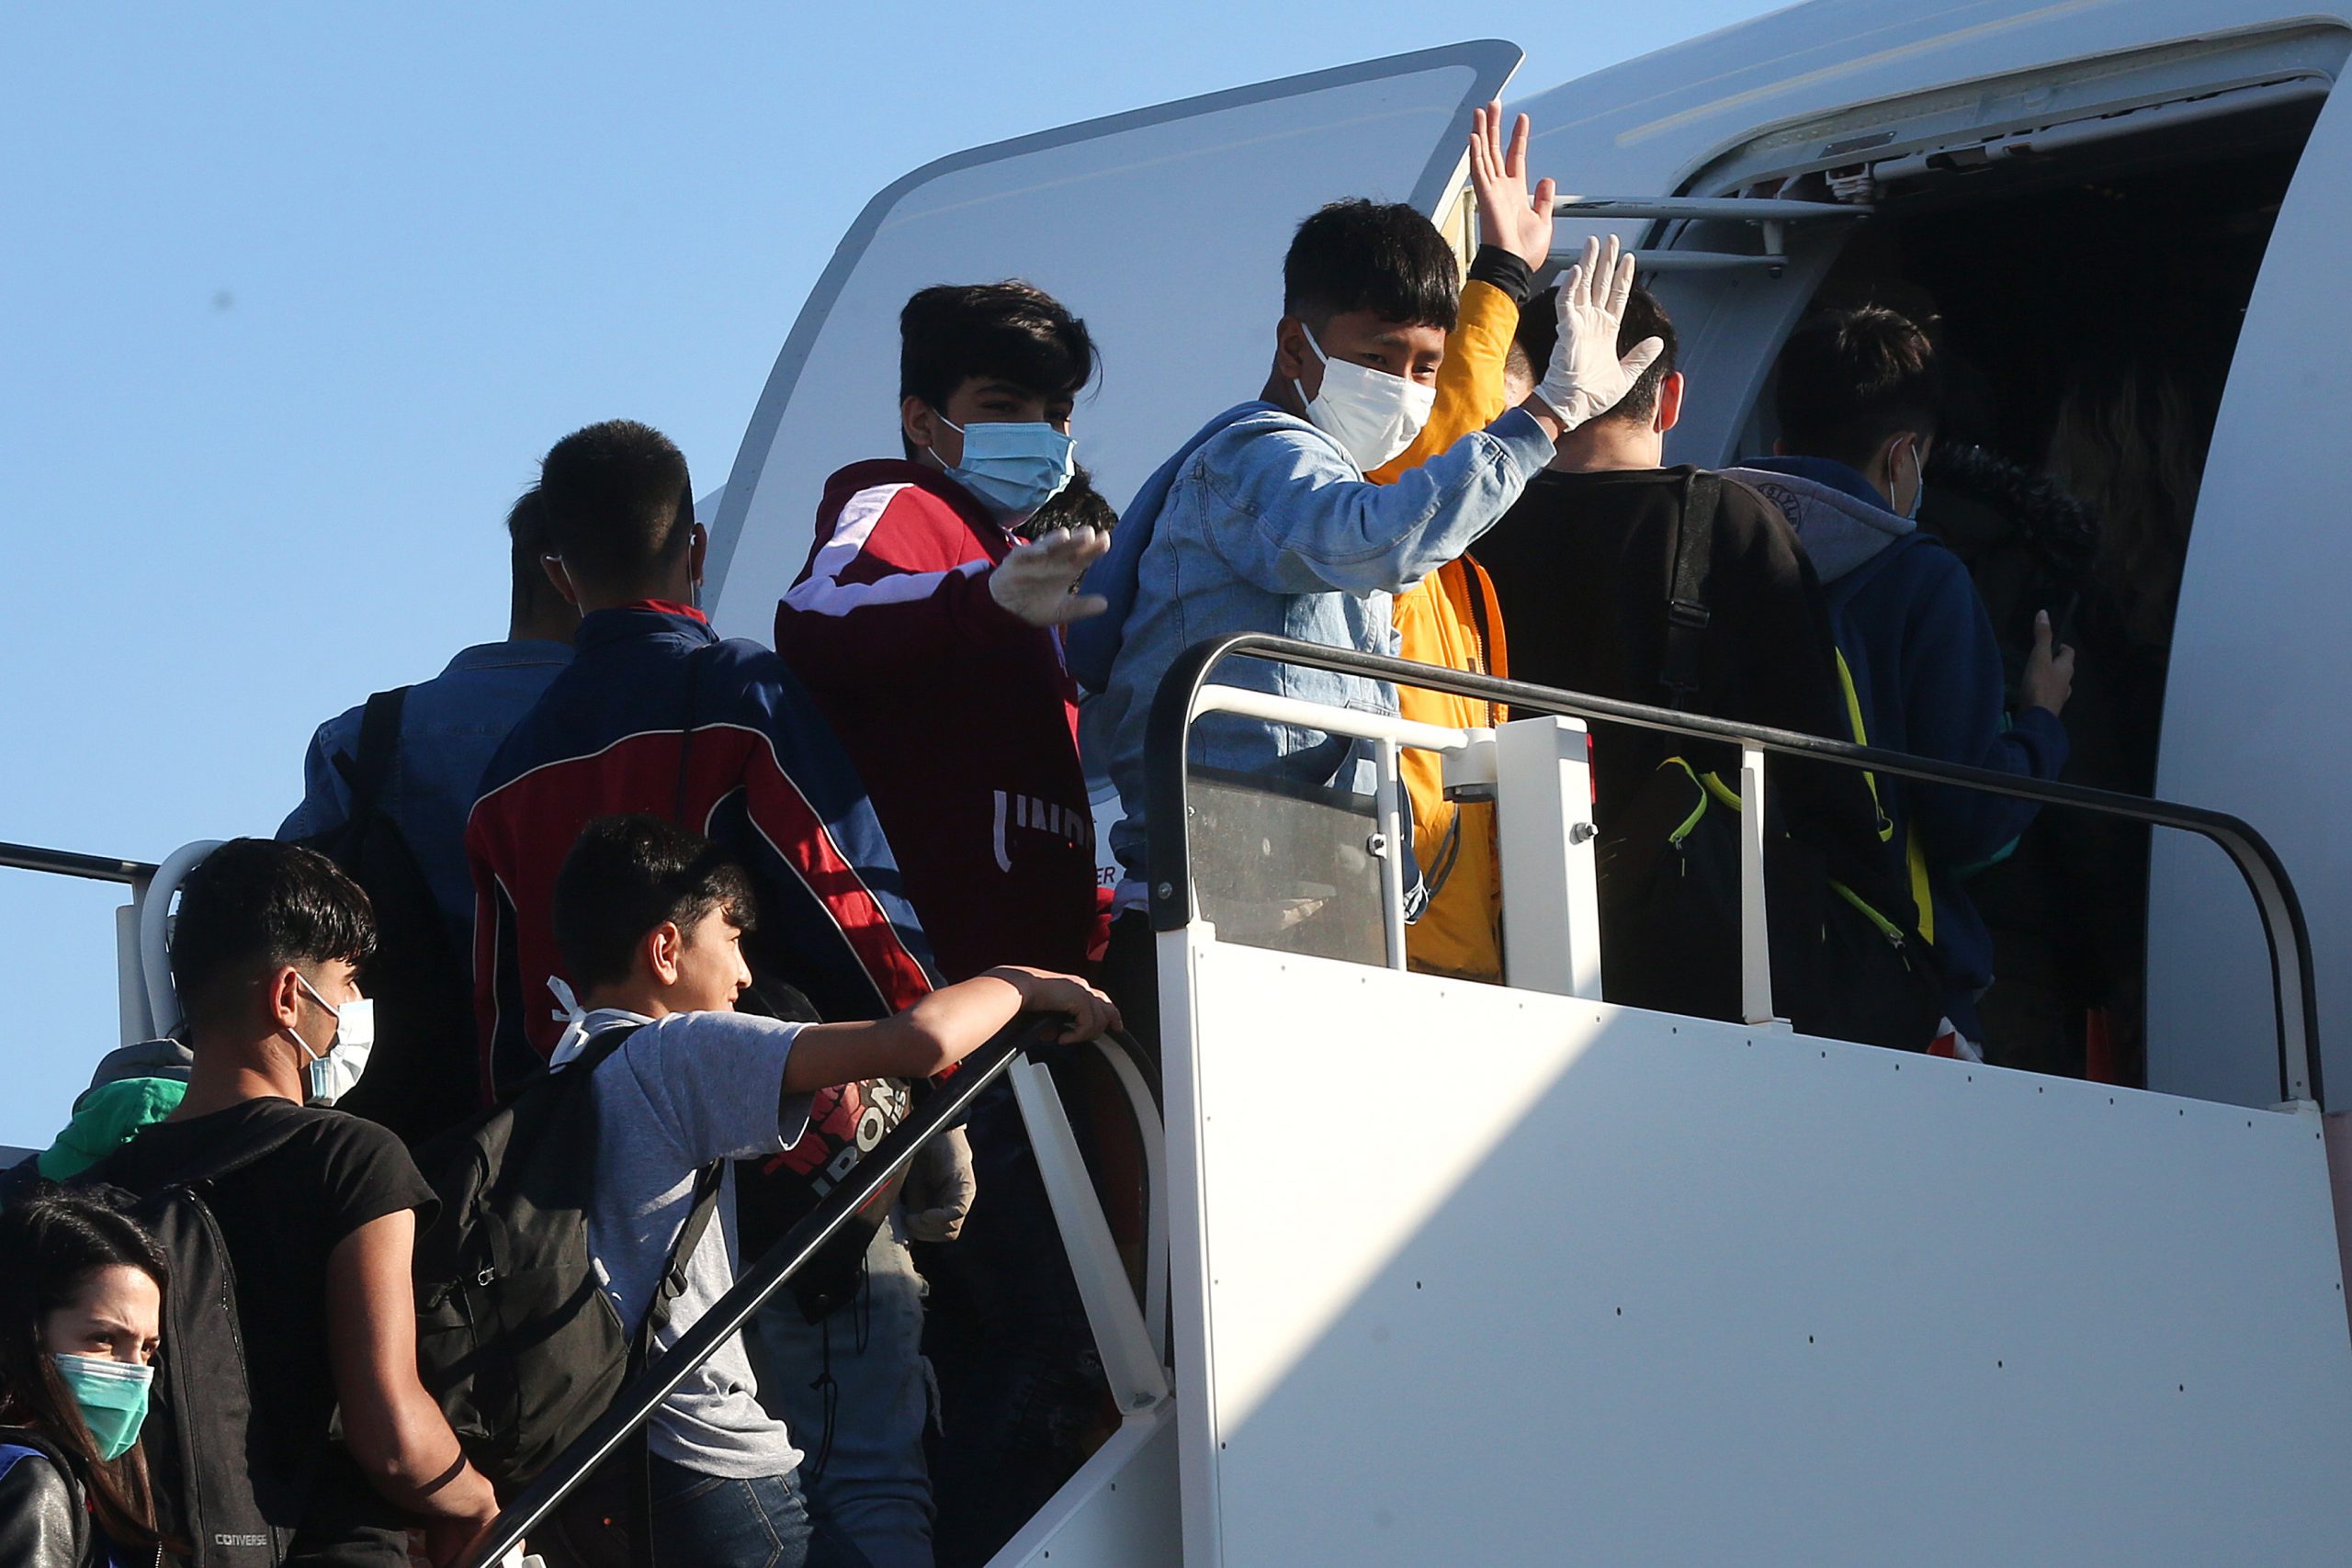 epa08370151 Unaccompanied minor refugees, who were living at the migrant camps of the islands of north Aegean Sea, board an airplane at the International Airport of Athens, to travel to Germany, in Athens, Greece, 18 April 2020. 53 children have been accepted to live in shelters for minors in Germany.  EPA/ORESTIS PANAGIOTOU